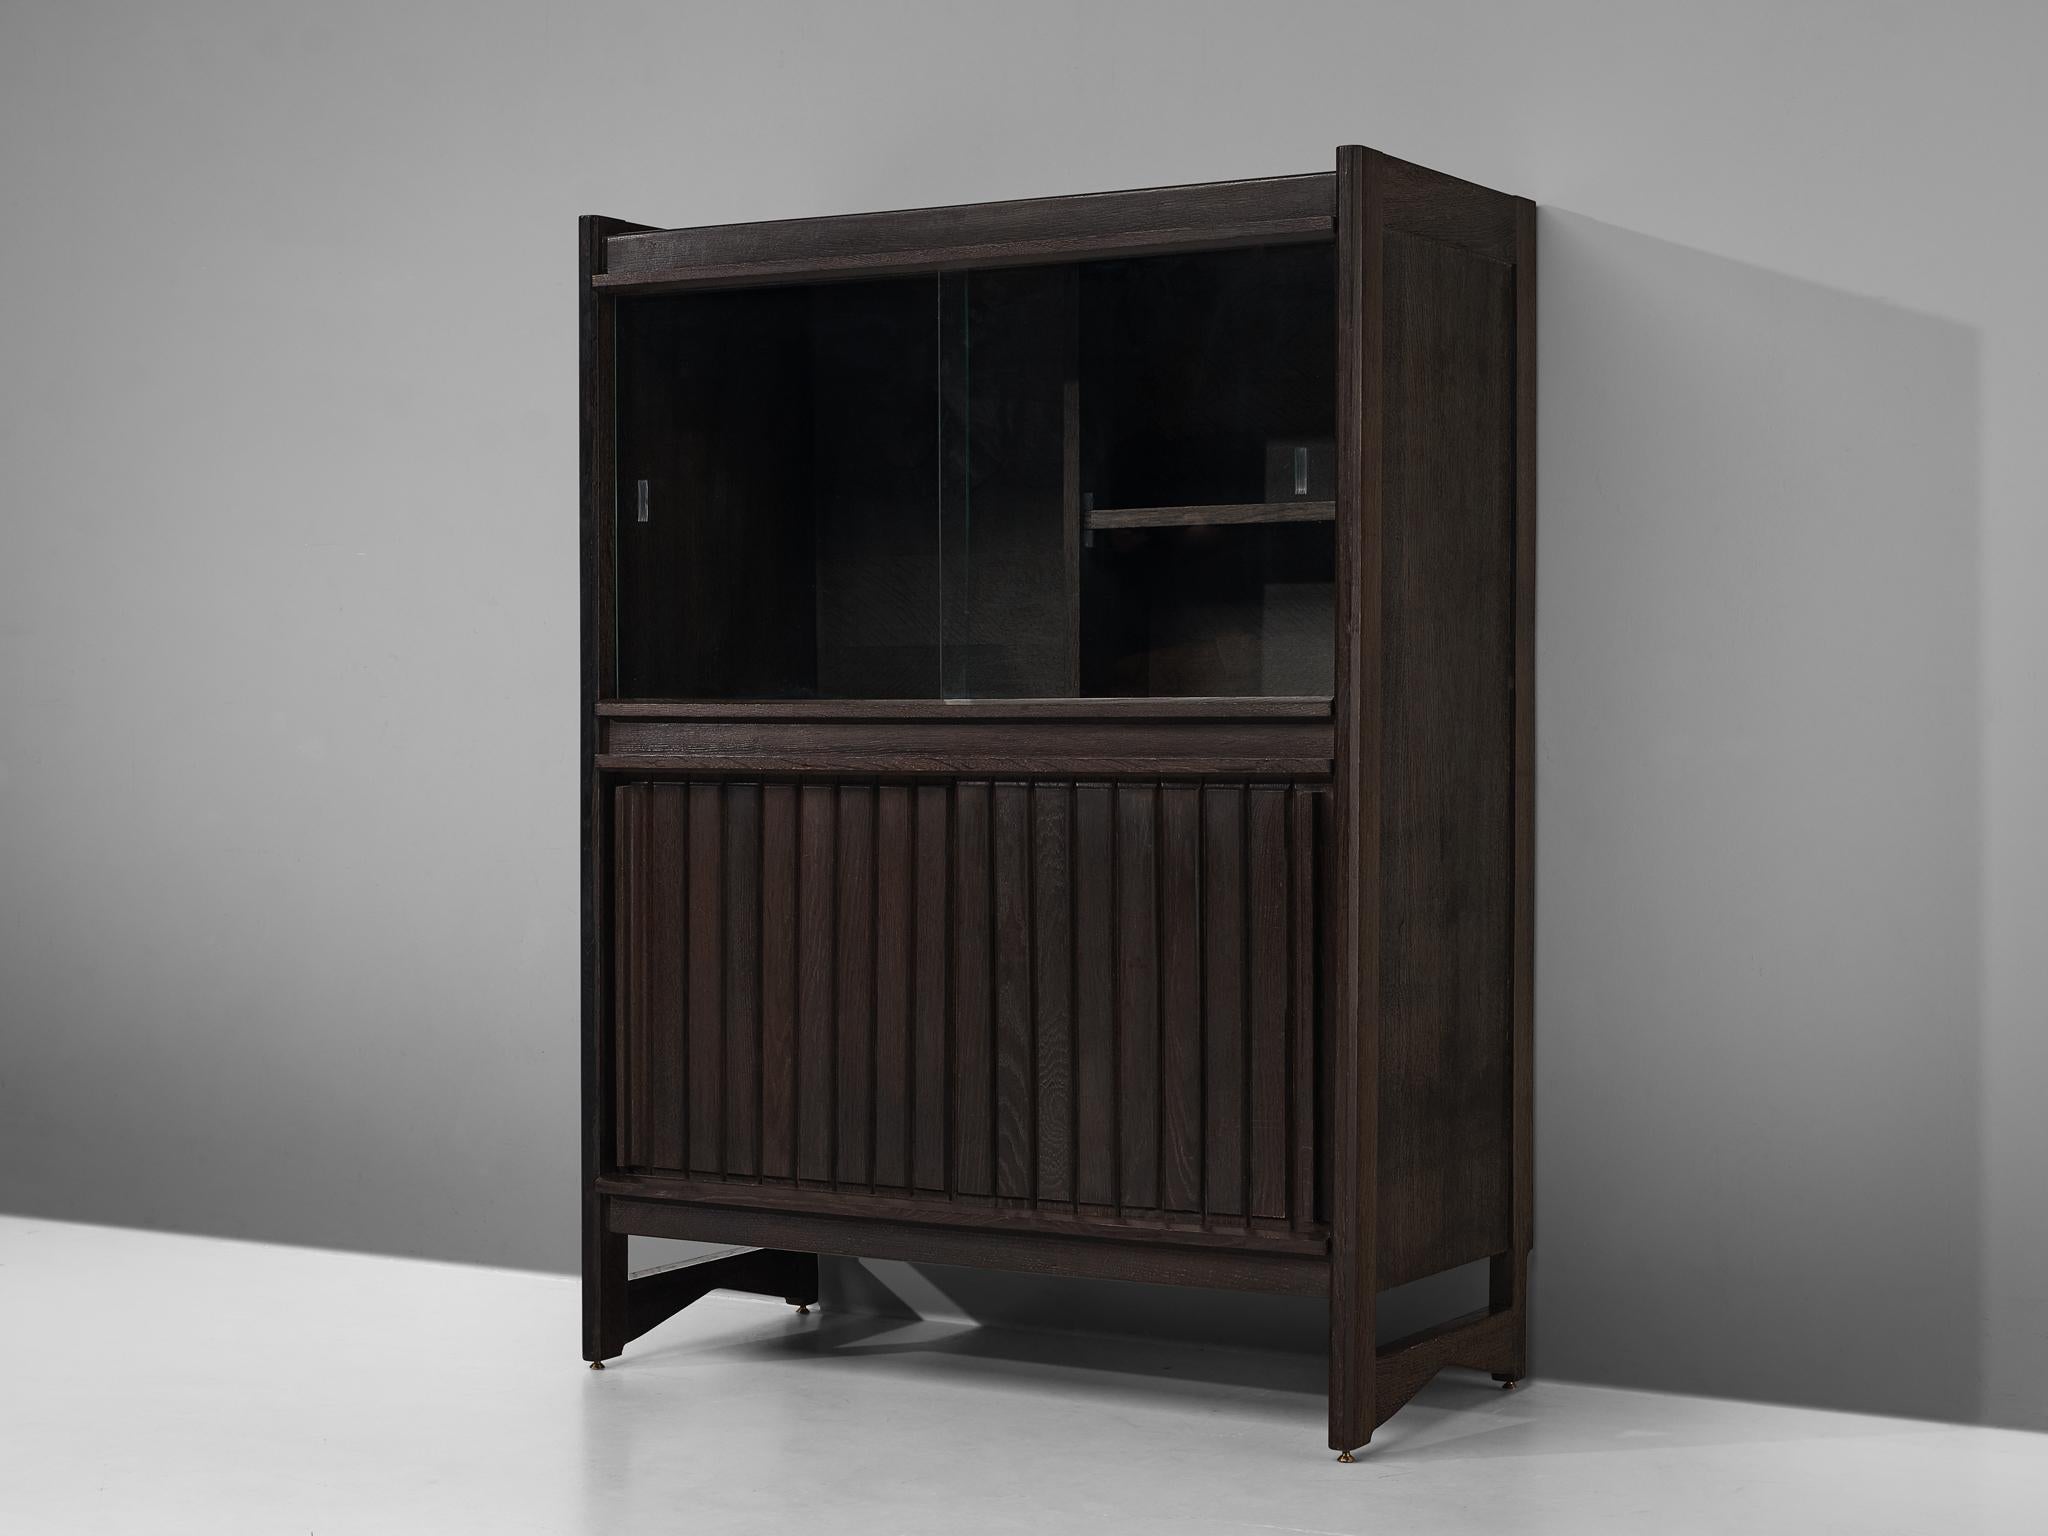 Guillerme & Chambron for Votre Maison, cupboard, stained oak, France, 1960s

This sculptural cabinet is made by the designer duo Guillerme & Chambron. The piece is executed in solid, stained oak and features sculptural lines and edges. The piece